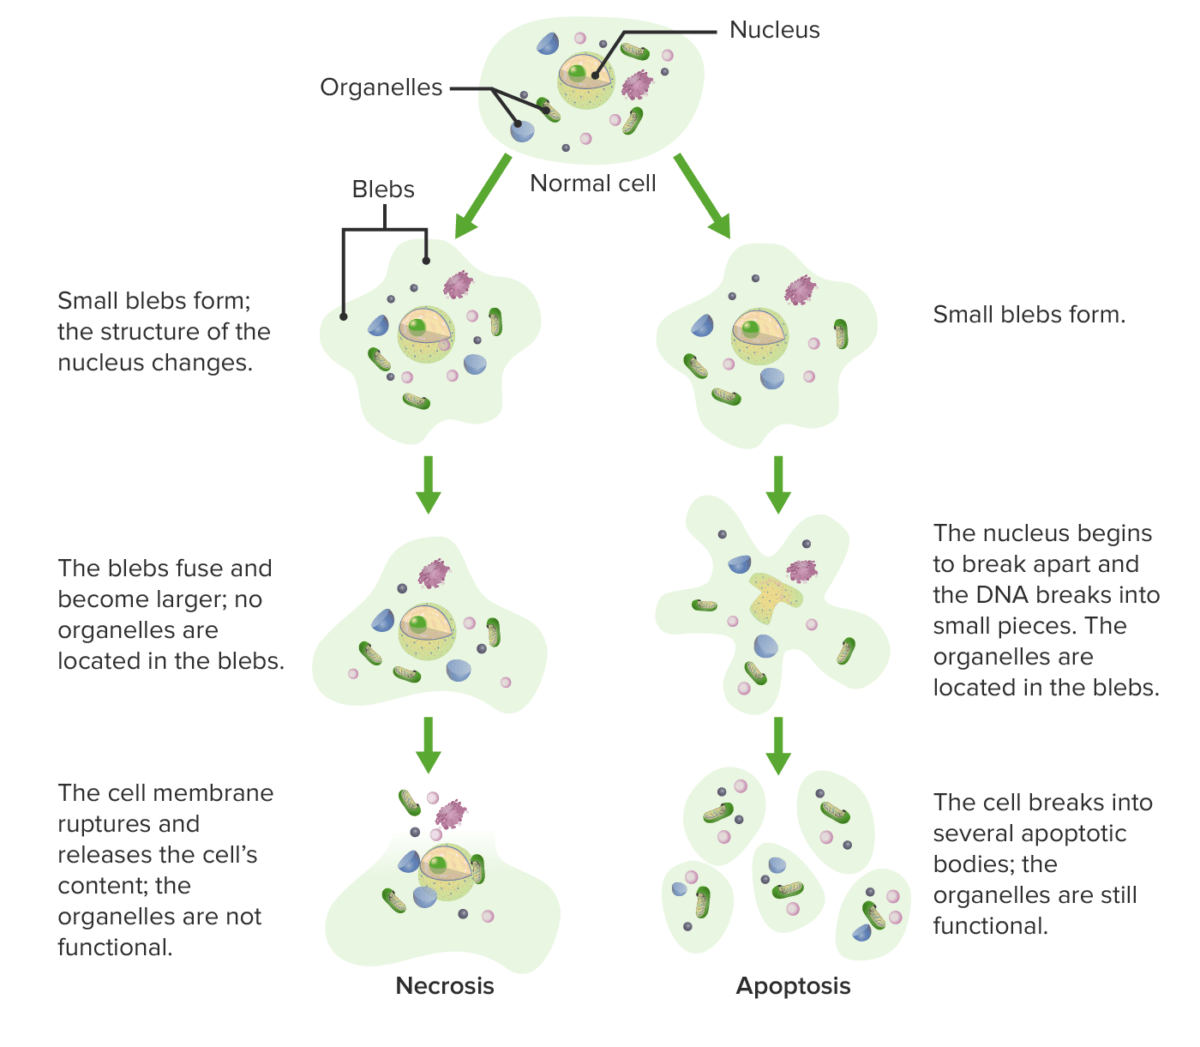 Differences between apoptosis and necrosis at structural level